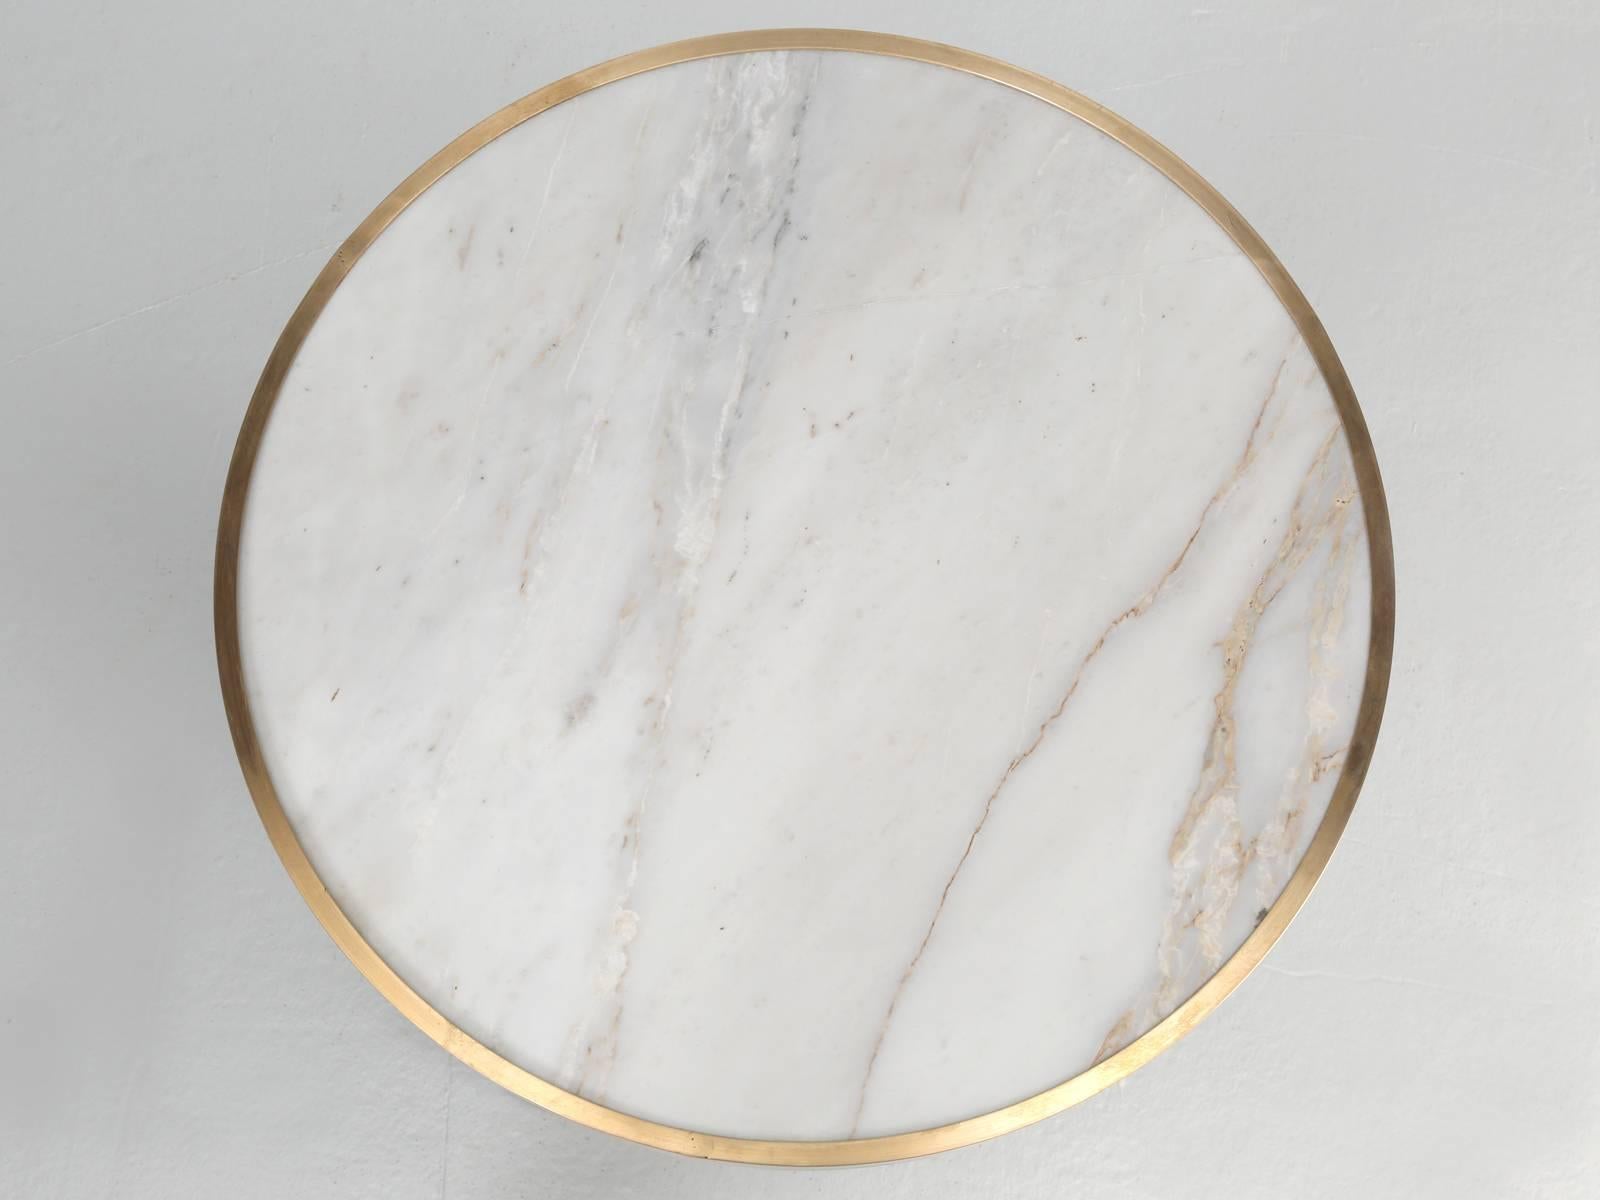 France is full of old and new bistro tables, but the best and most difficult to come by, are the nice old Carrera marble ones, with the nice brass or bronze edging.